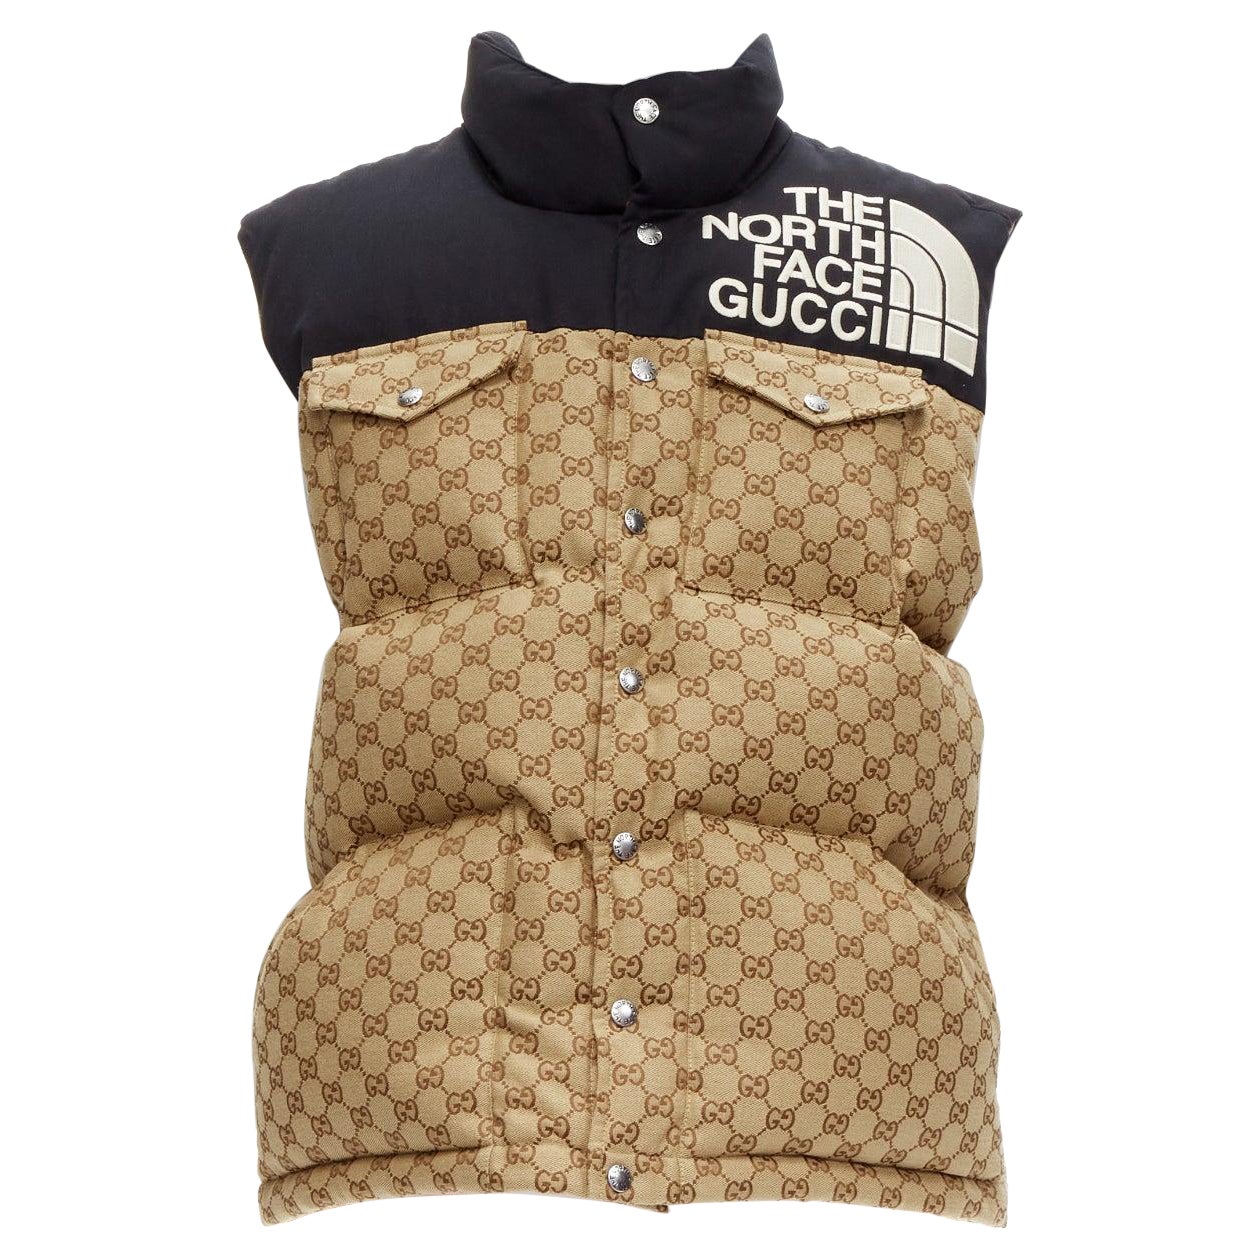 new GUCCI THE NORTH FACE beige big logo GG monogram padded vest jacket IT40 S